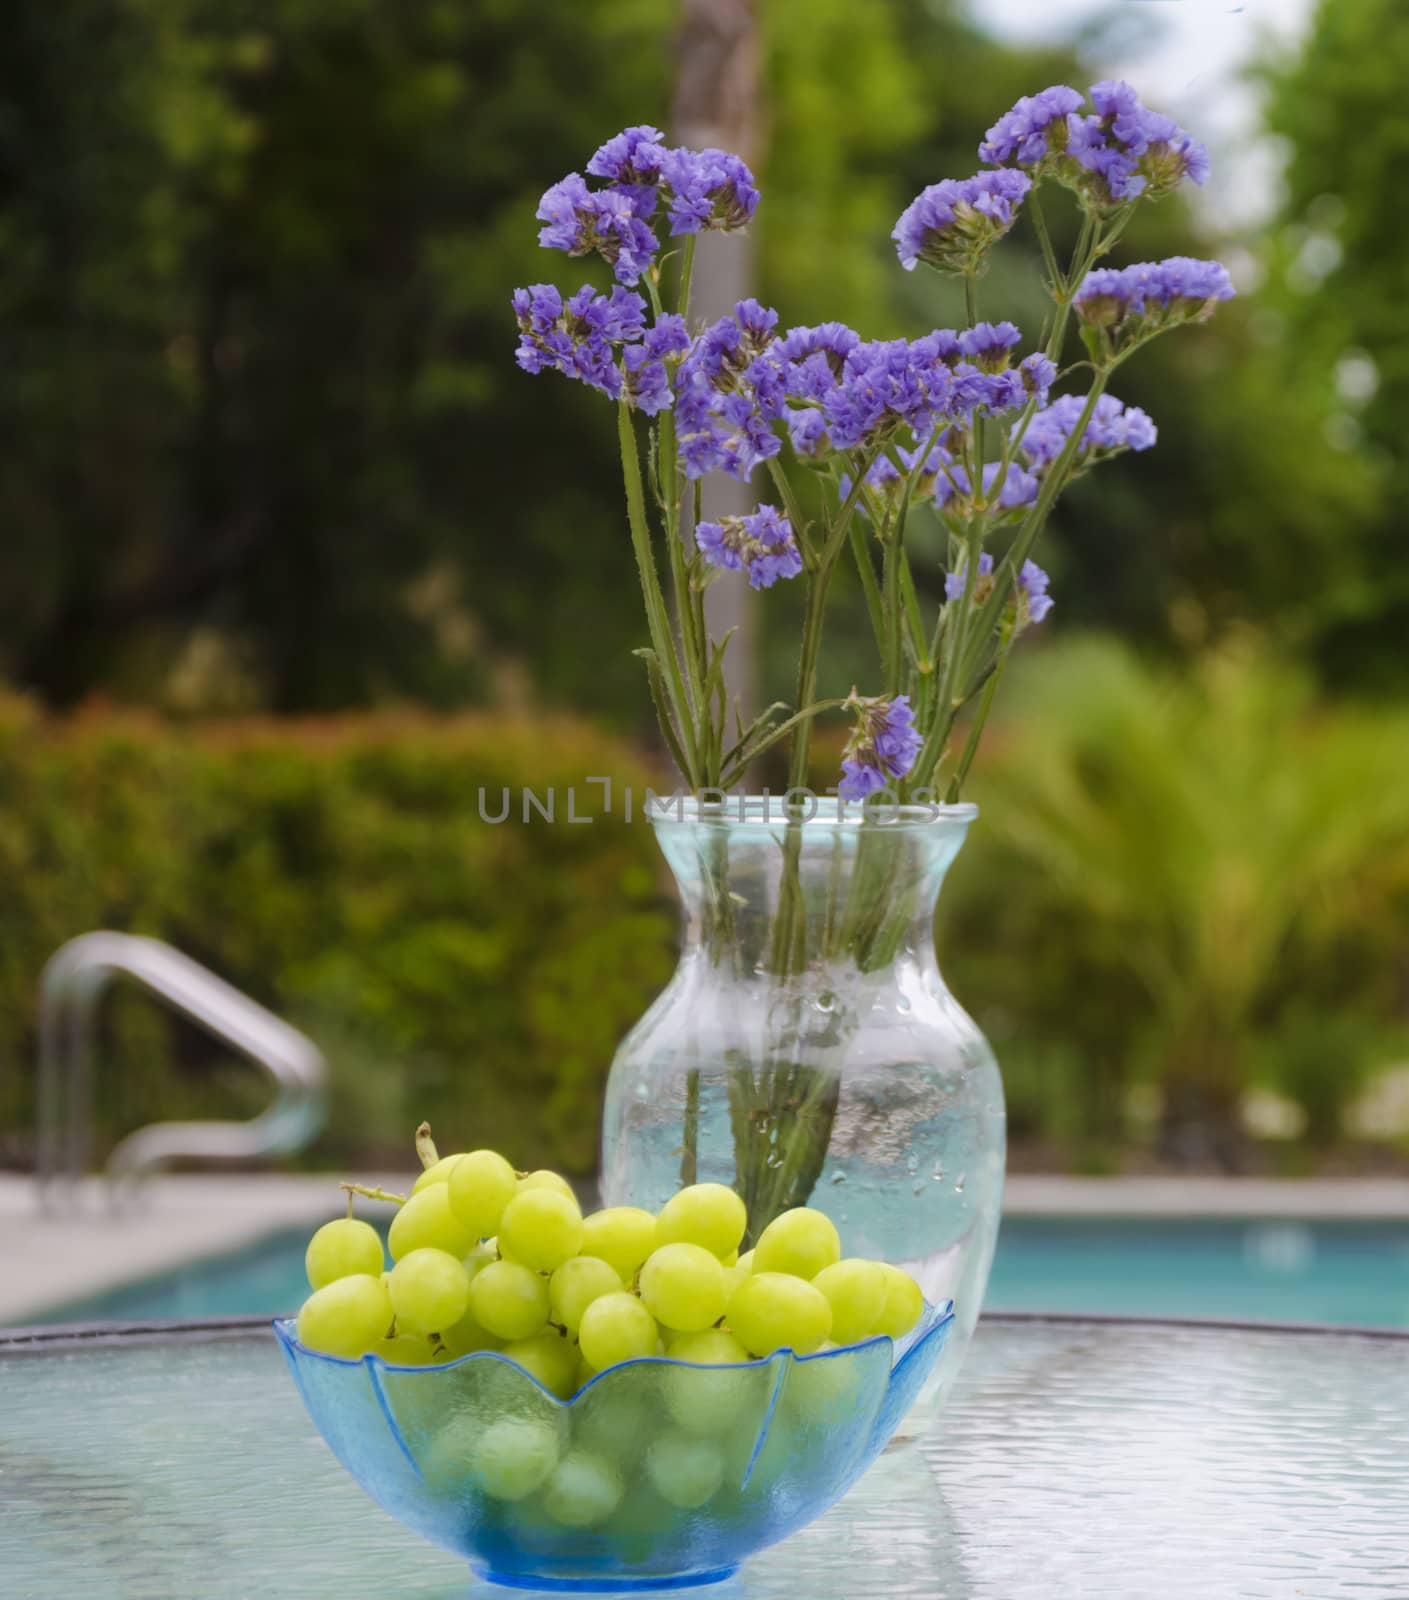 Vase with flowers and grapes by the pool by EllenSmile